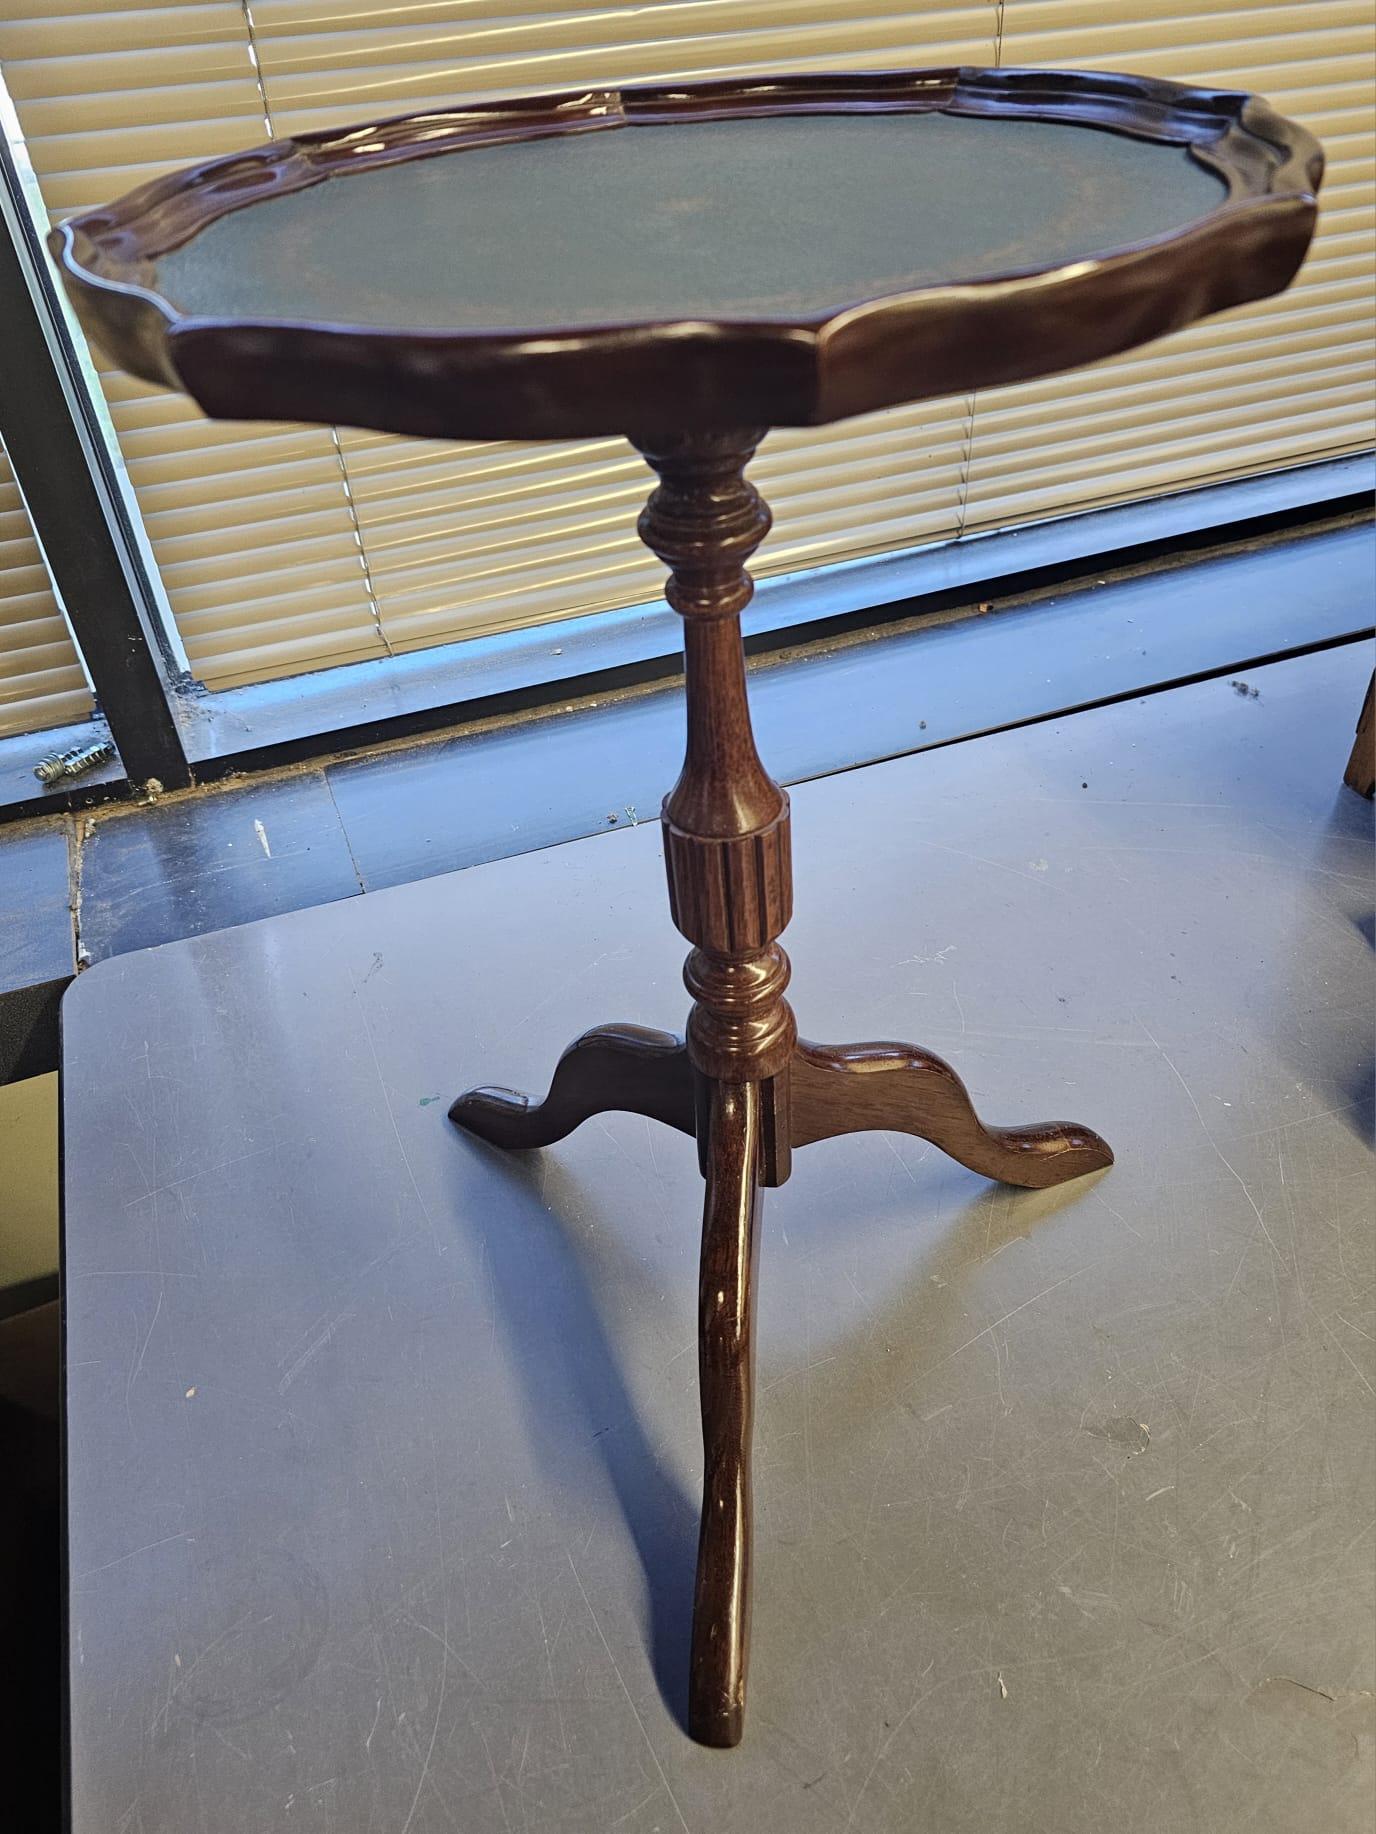 A 20th Century Pedestal Mahogany and Leather Top Inset Candle Stand in great vintage condition.
Measures 14.25